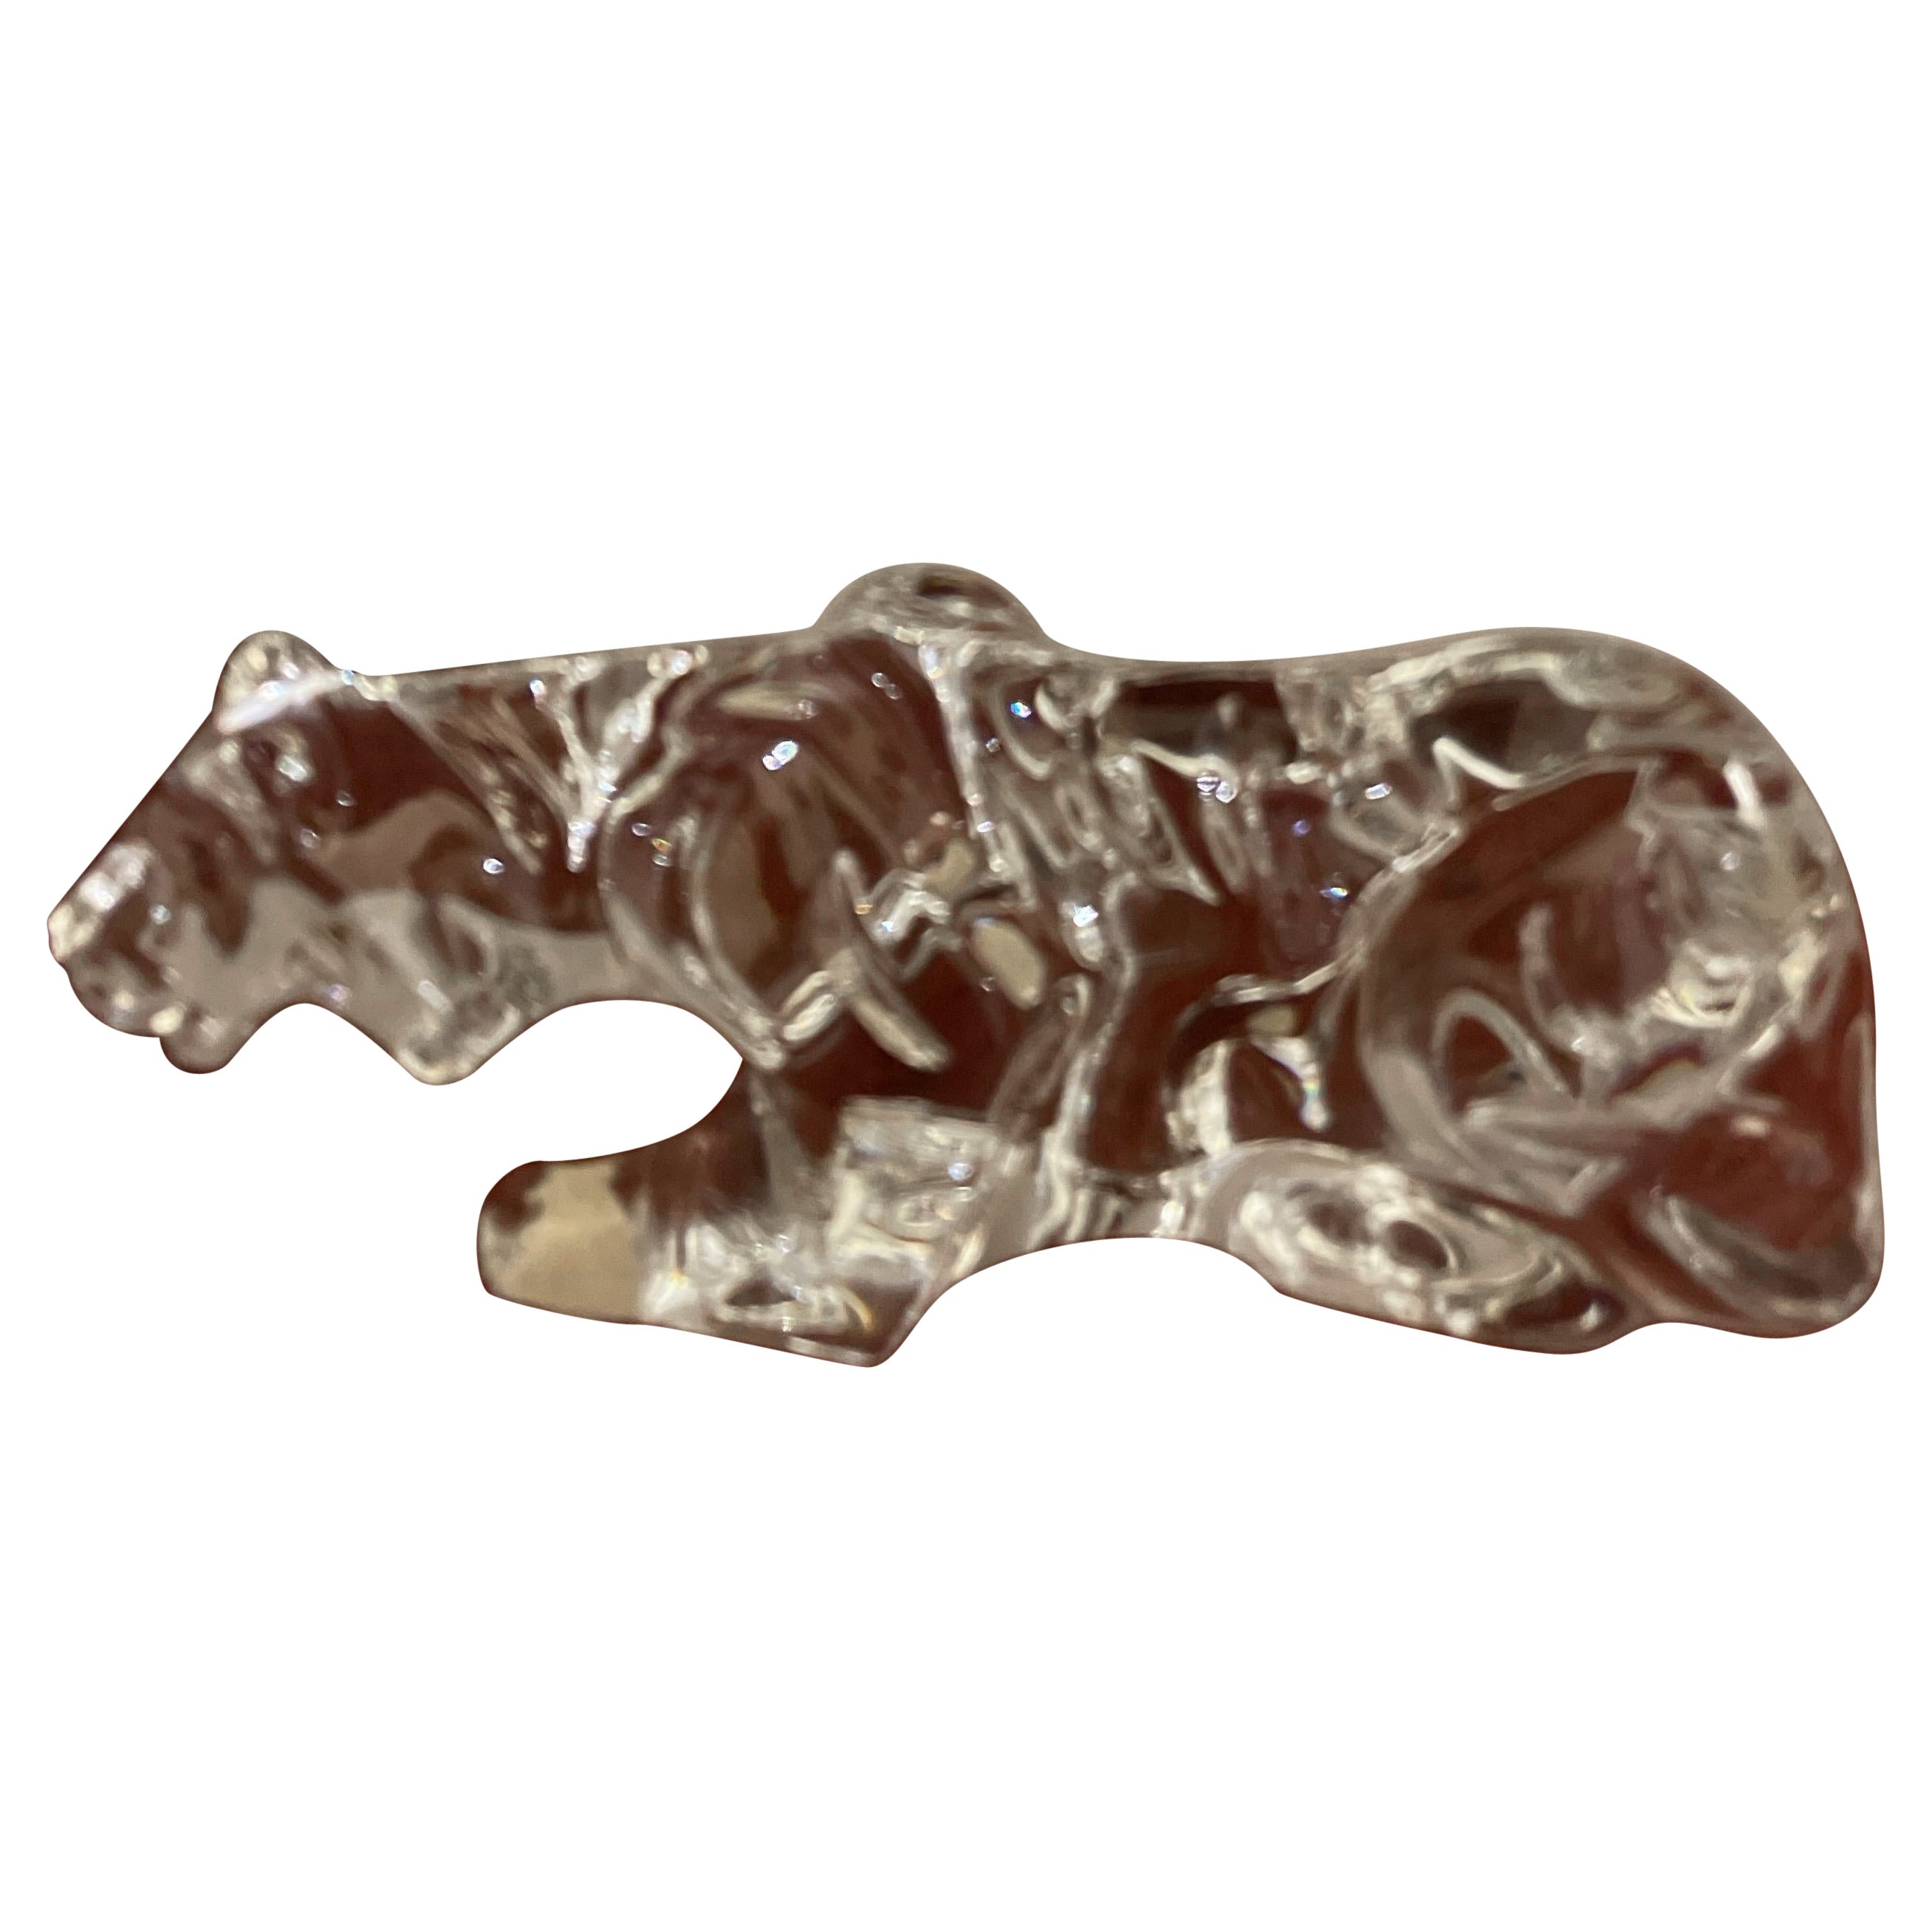 Baccarat Crystal Figurine / Paperweight of a Tiger